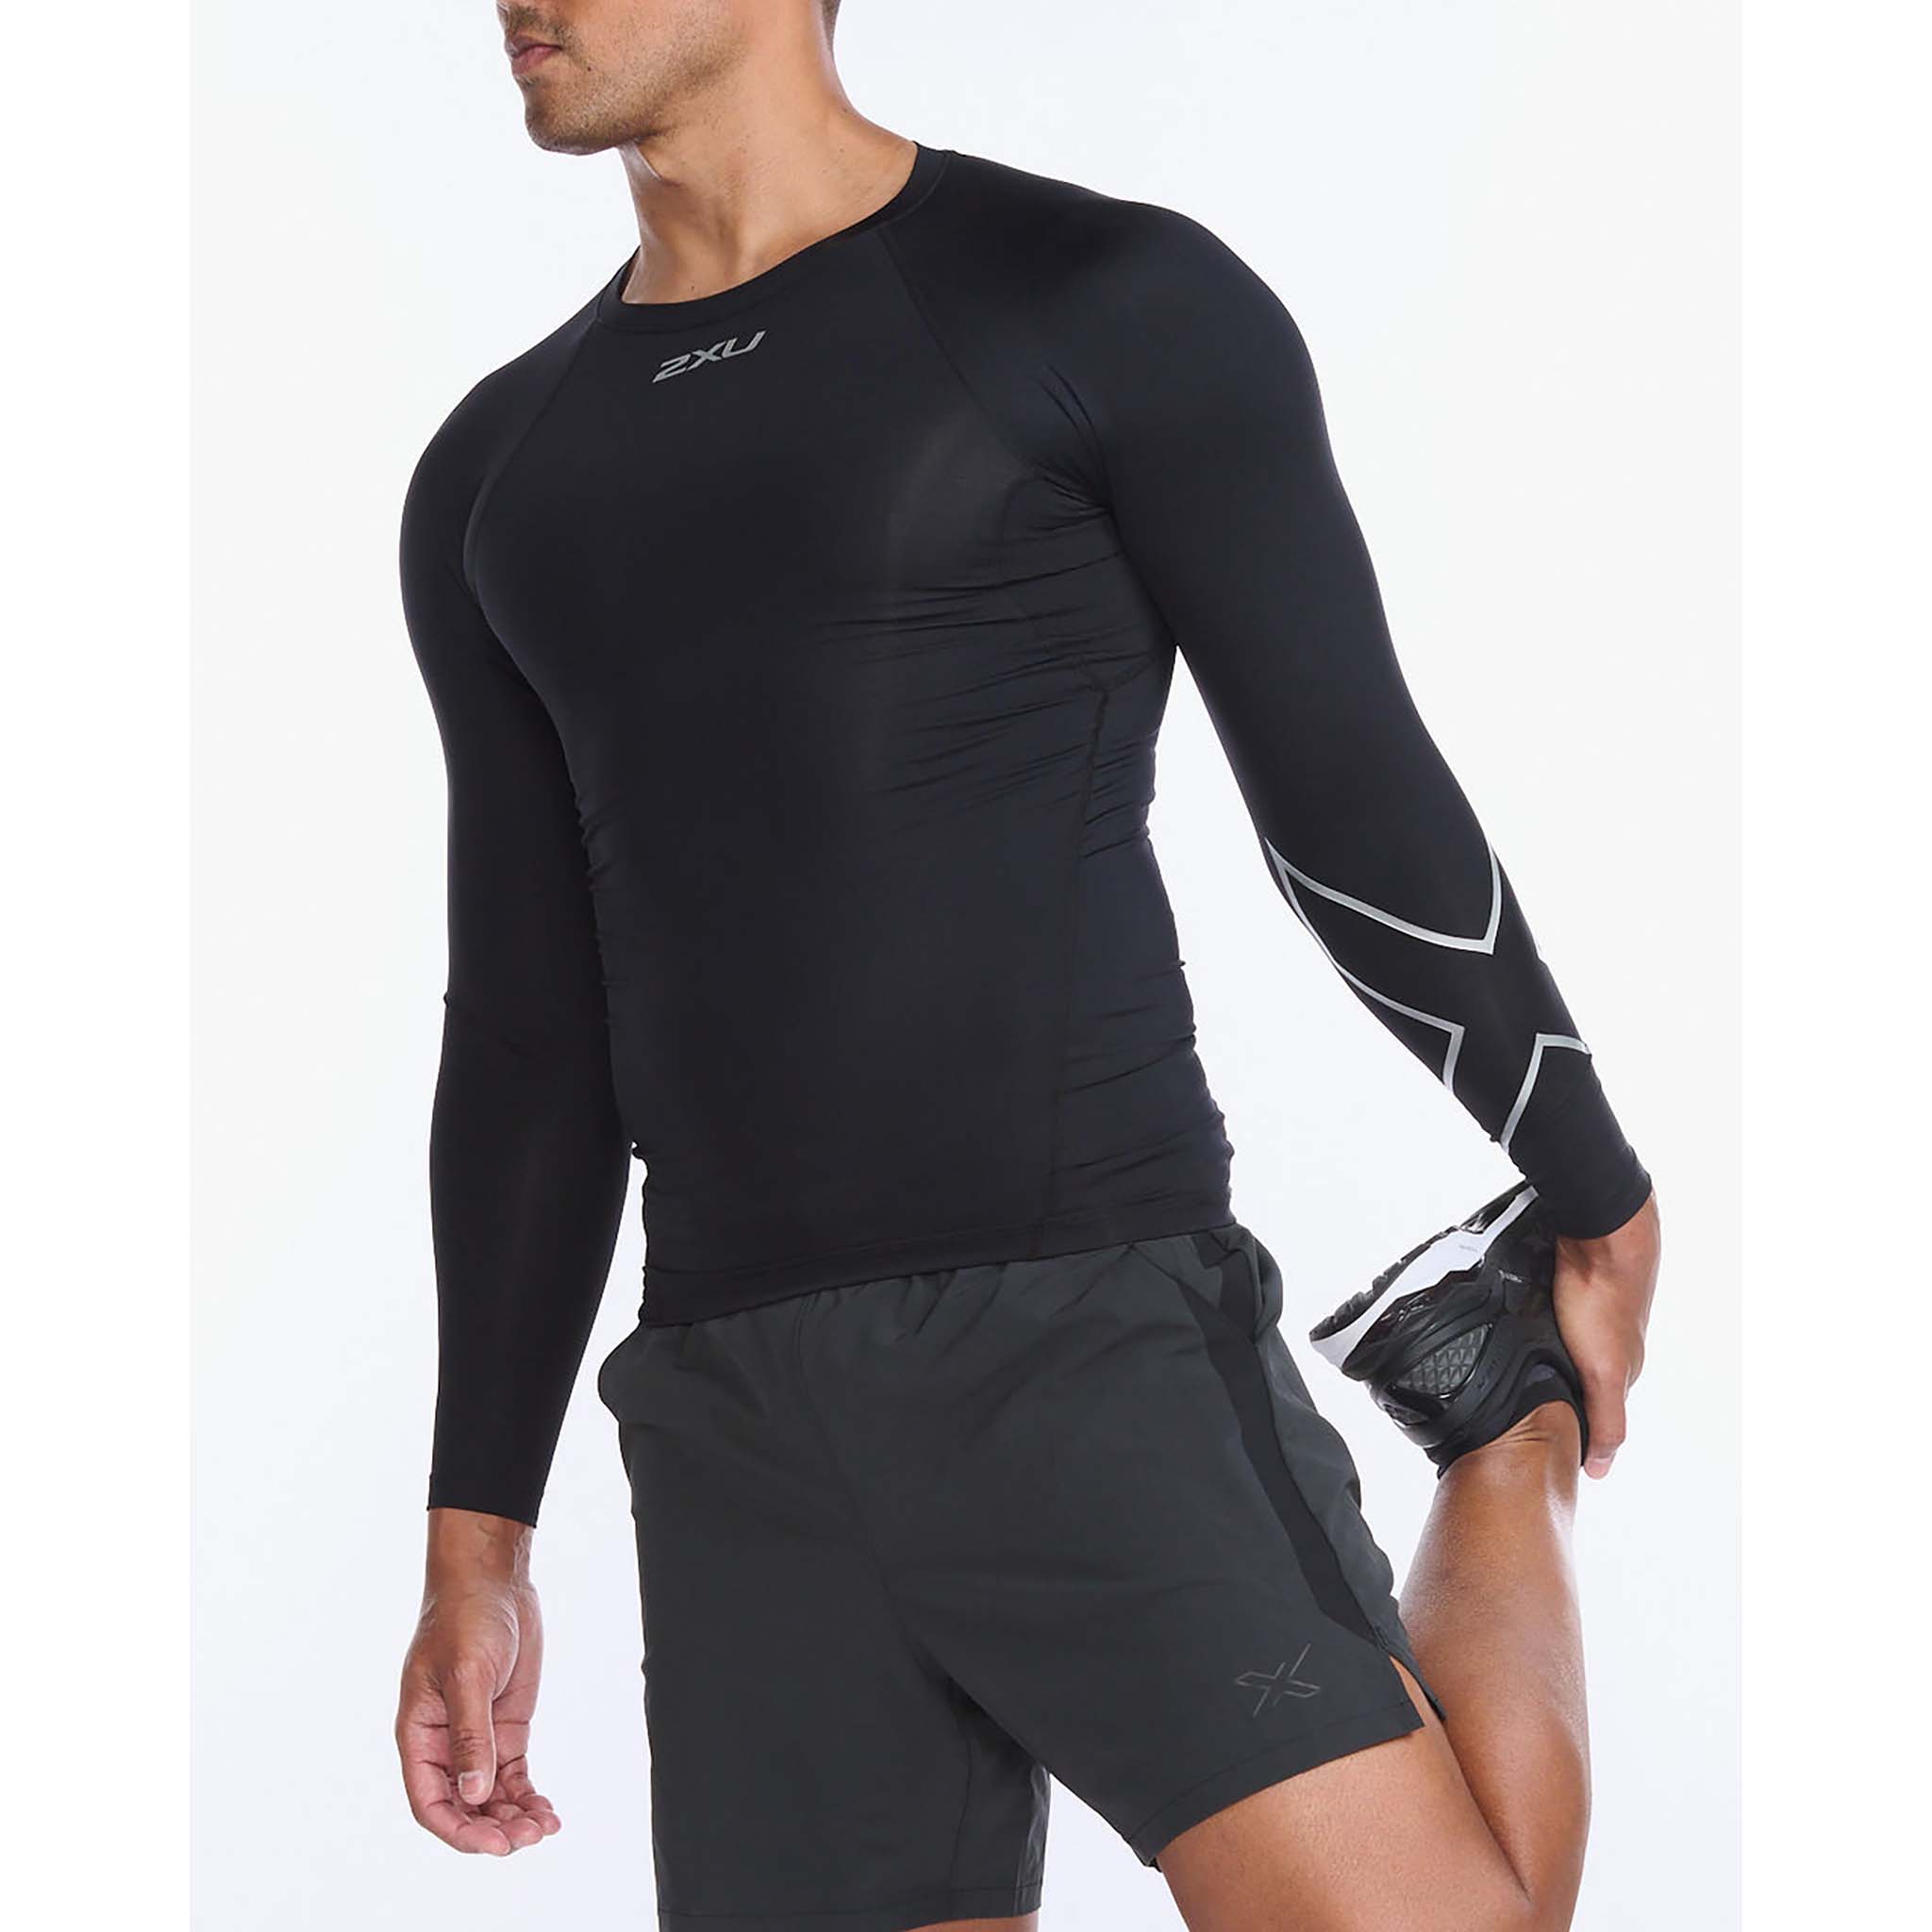 2XU long sleeve Core compression shirt for men – Soccer Sport Fitness